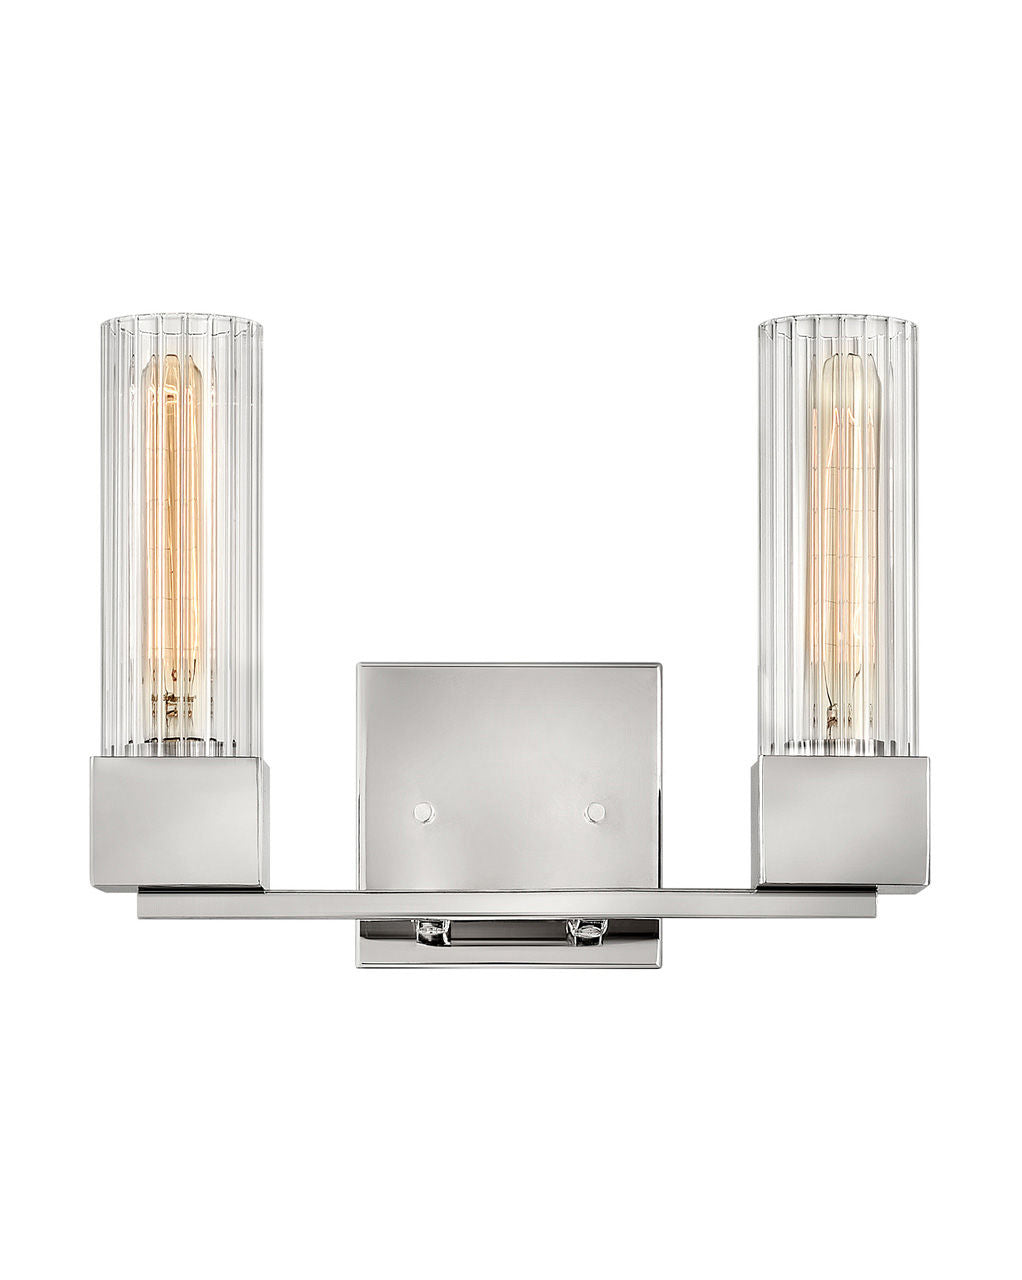 Hinkley Xander Vanity Wall Sconce Collection